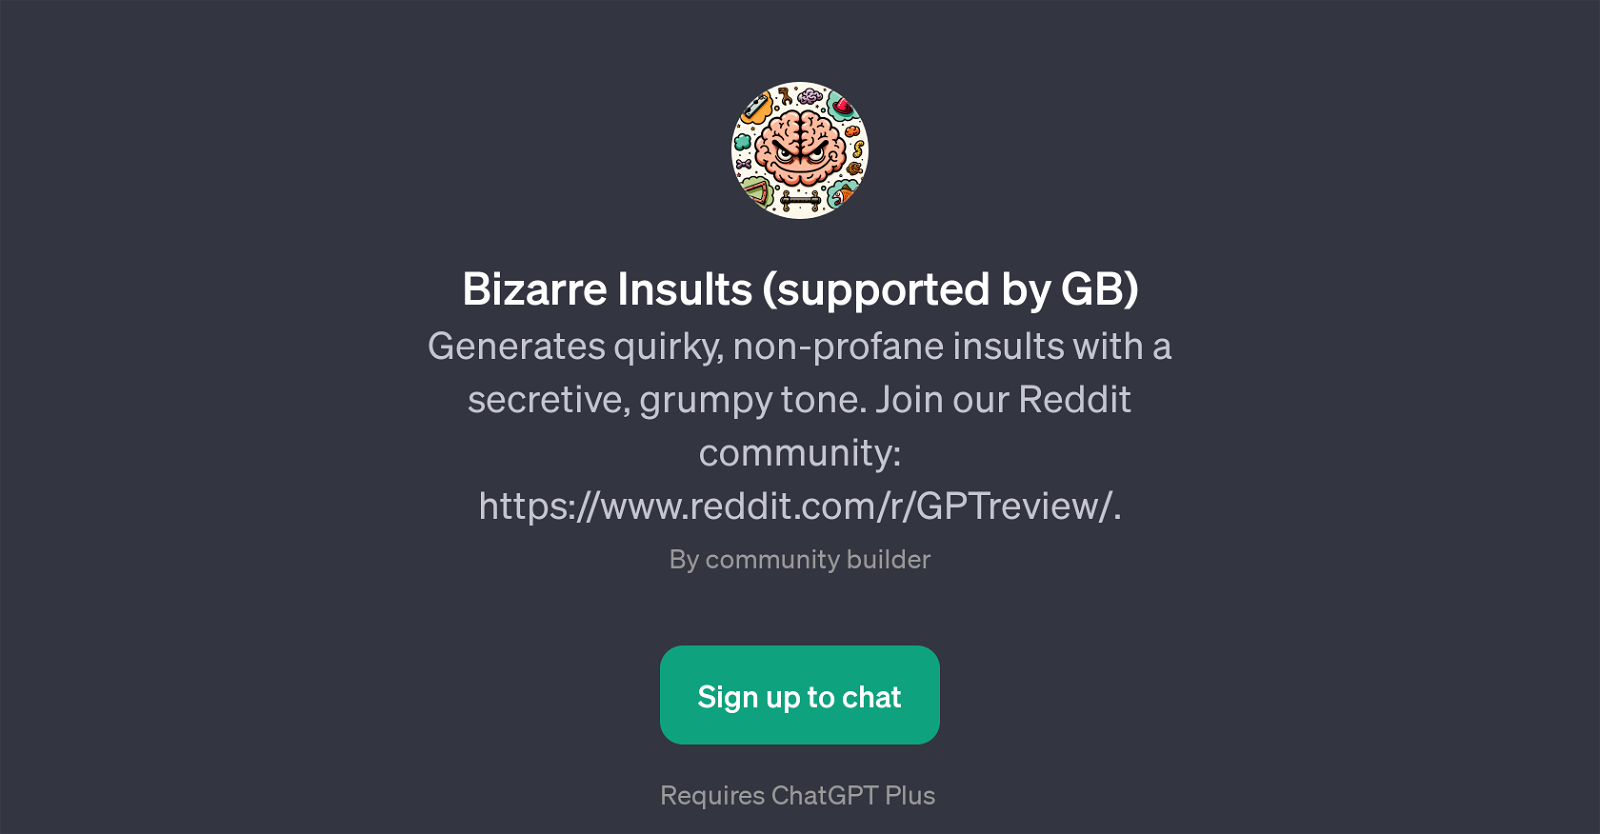 Bizarre Insults (supported by GB) website